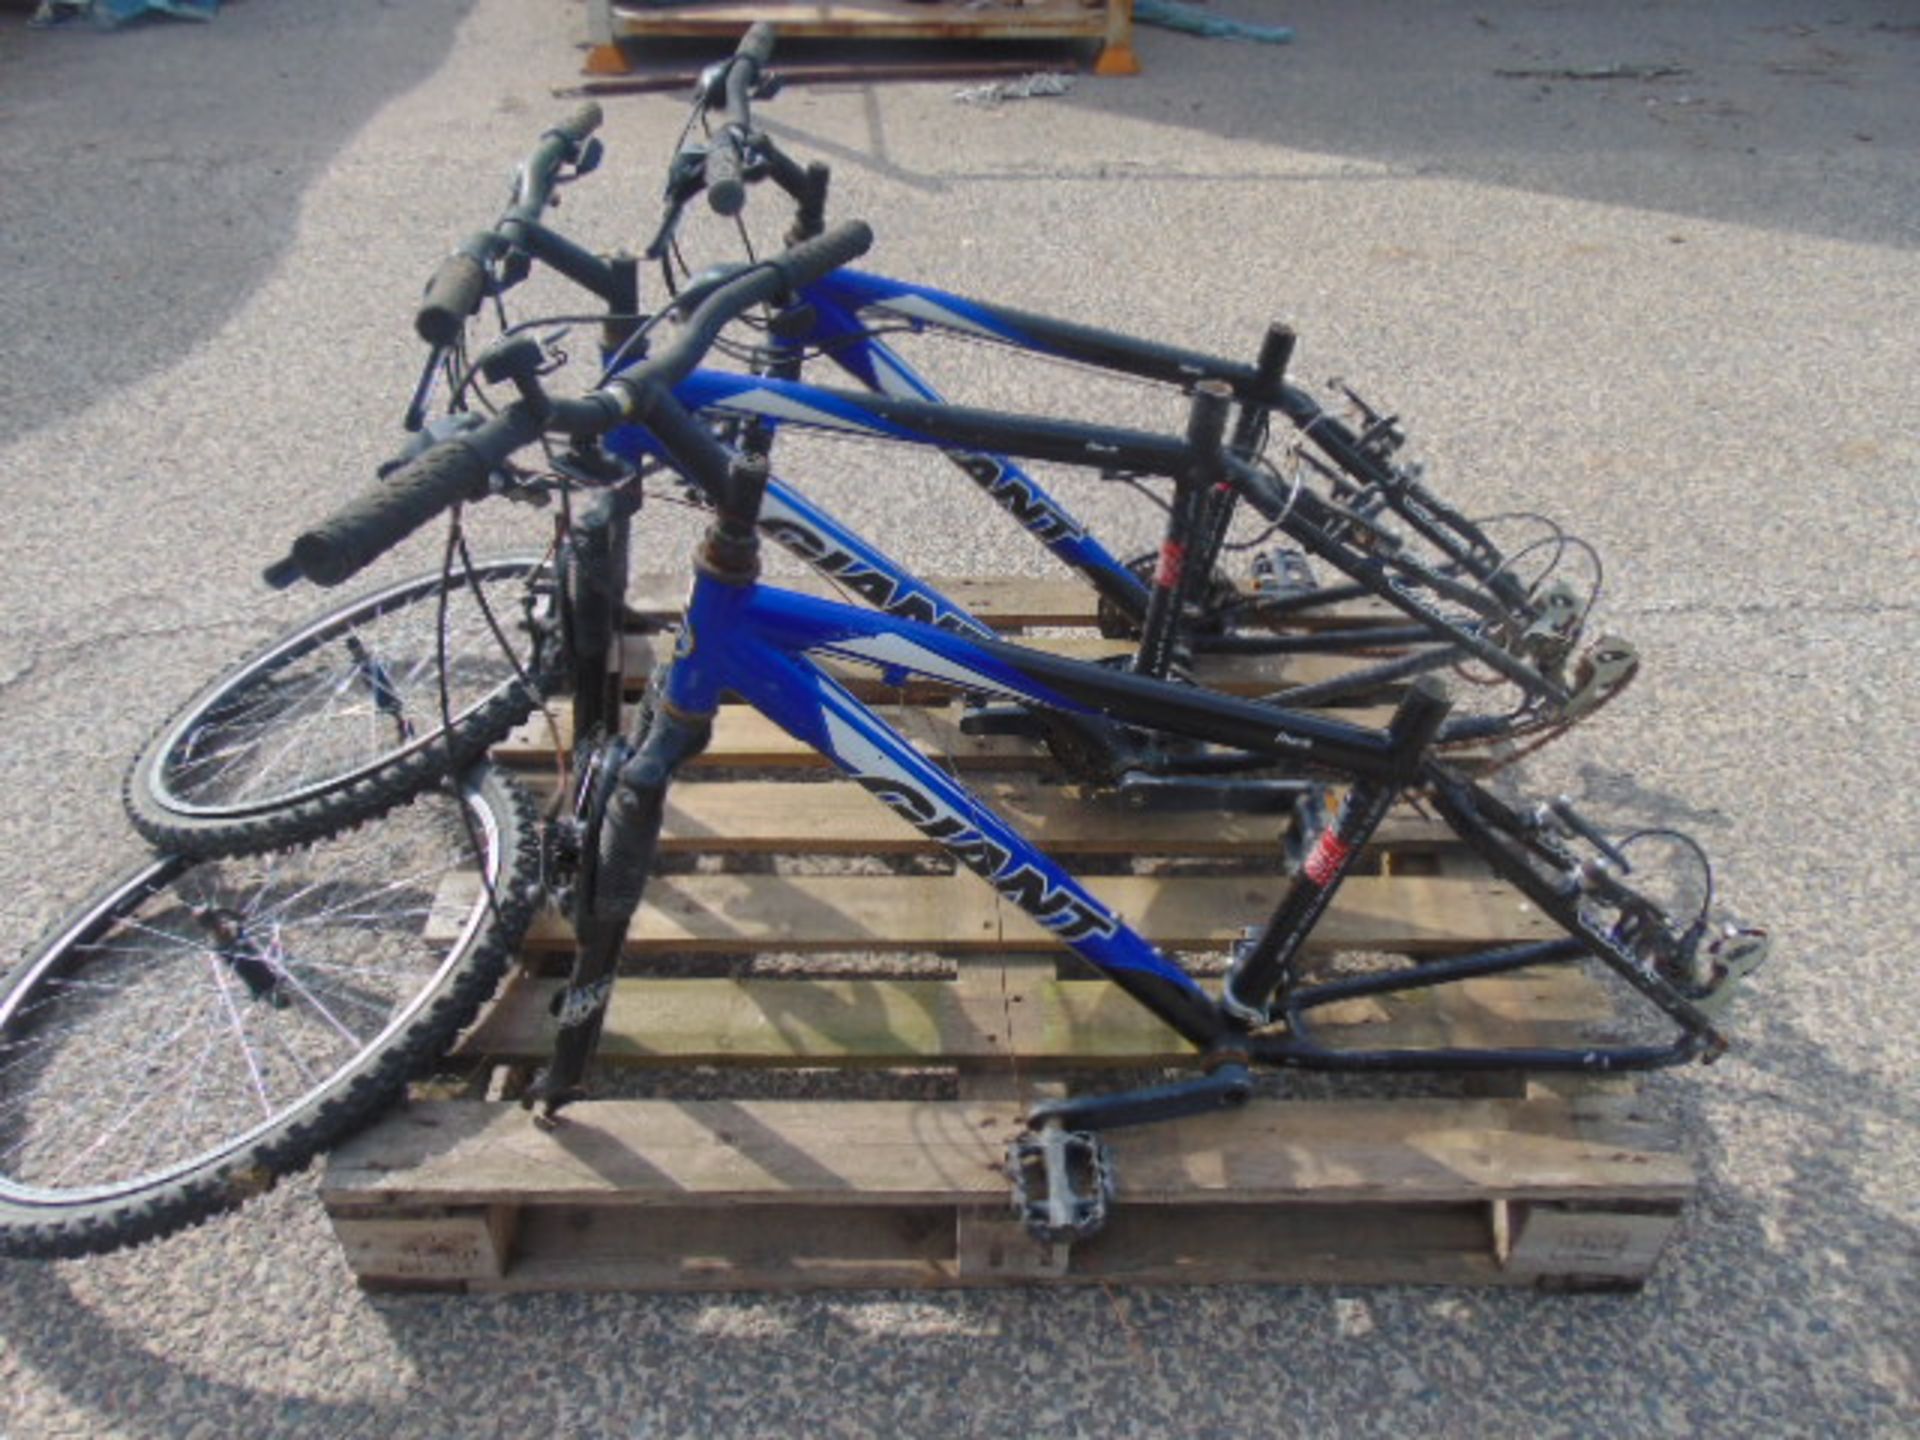 3 x Giant Alluxx 6000 Series Bike Frames with Forks, 2 x wheels etc - Image 2 of 9